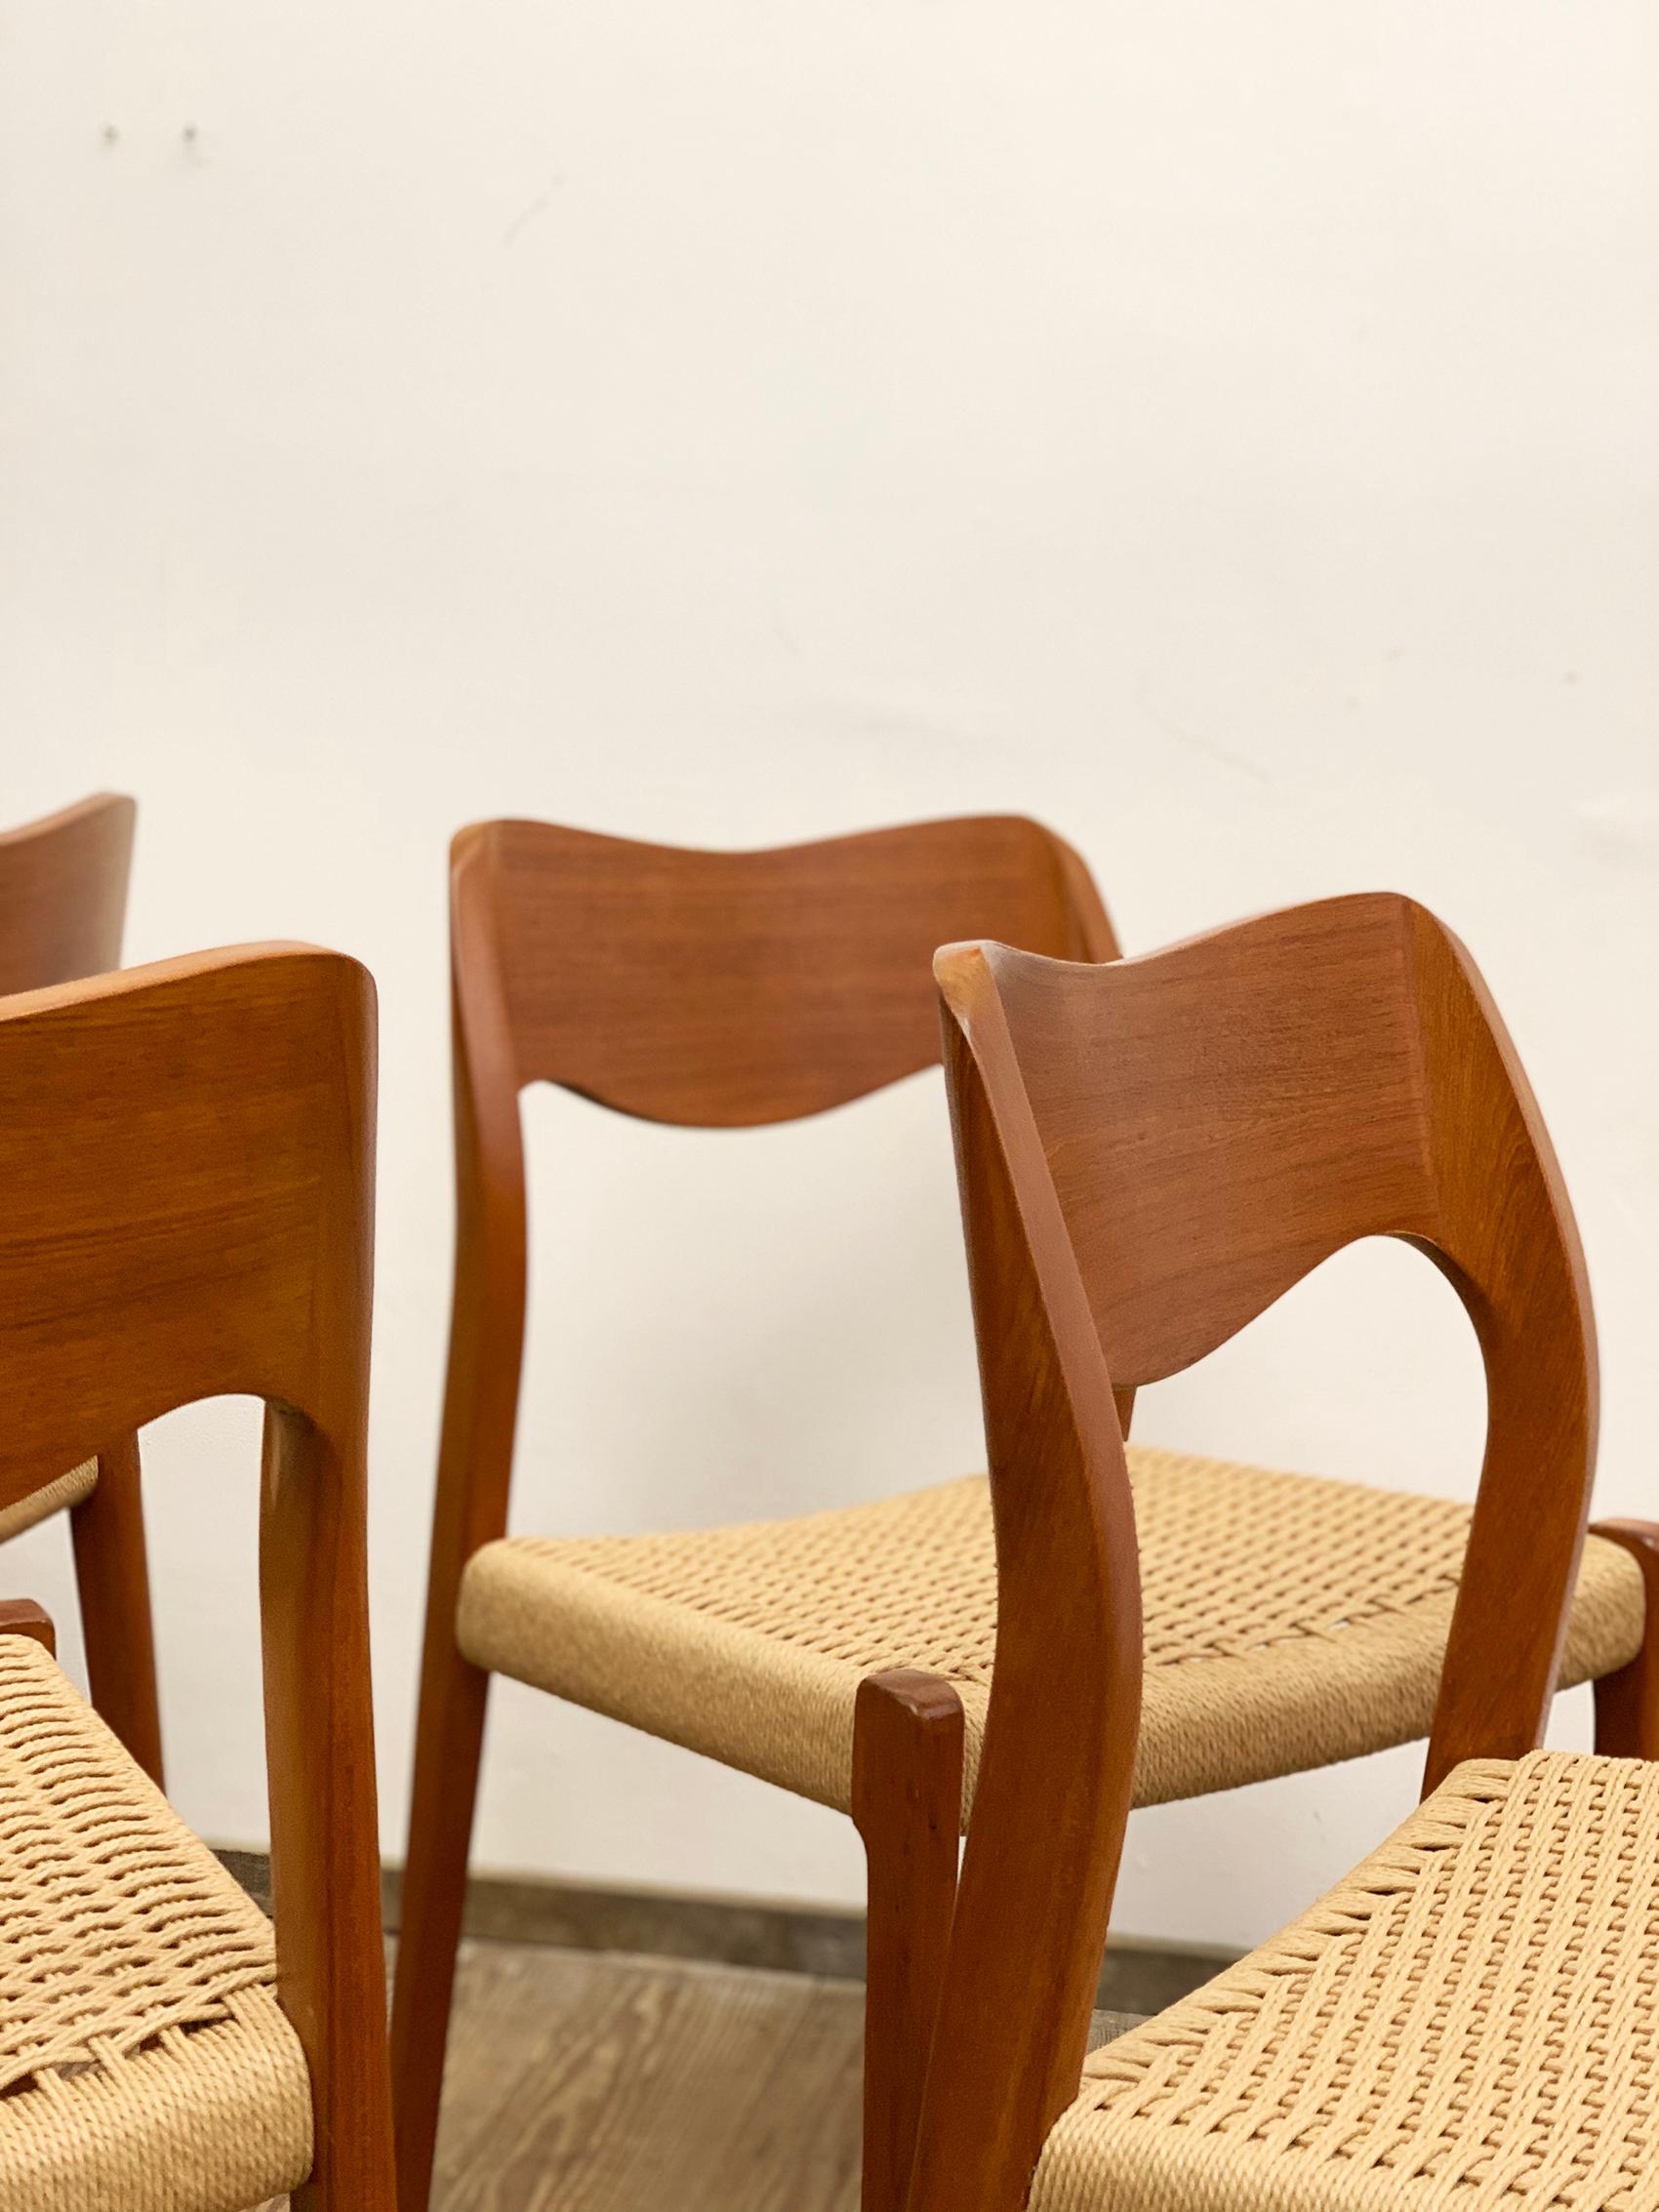 Mid-20th Century Mid-Century Teak Dining Chairs #71 by Niels O. Møller for J. L. Moller, Set of 4